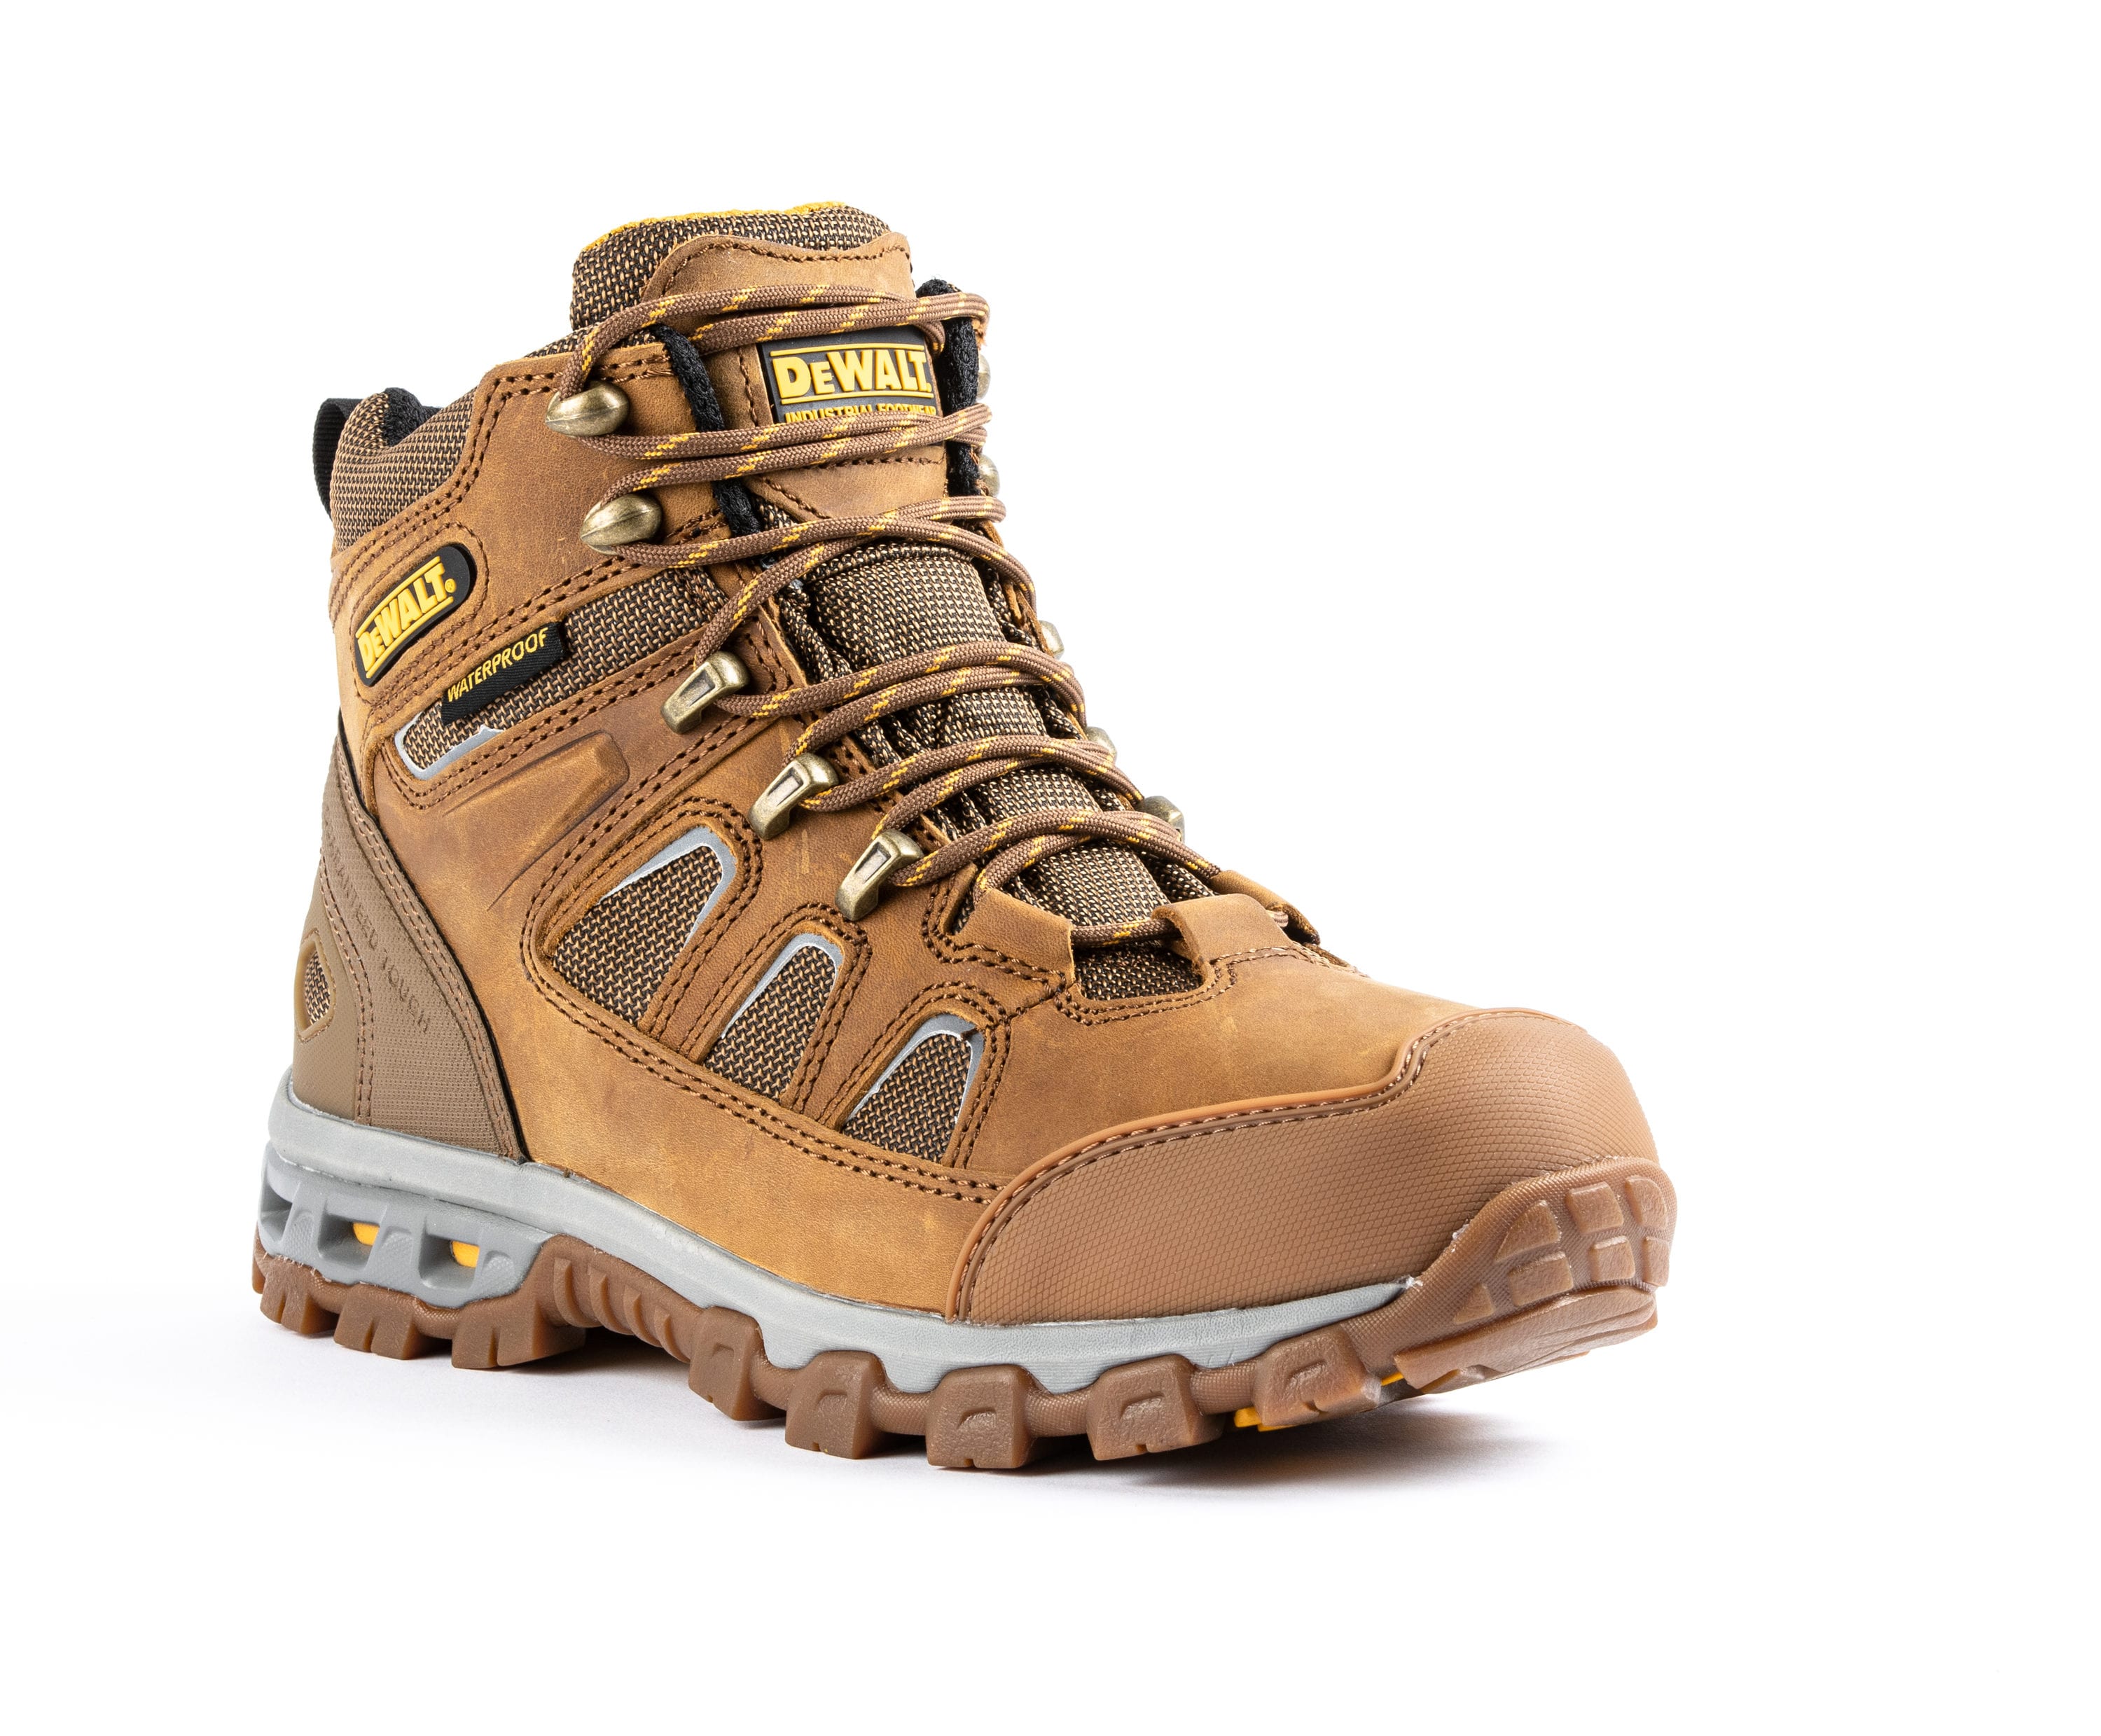 Mens Wheat Poseidon Waterproof Work Boots Size: 9 Wide in the Work Footwear department at Lowes.com